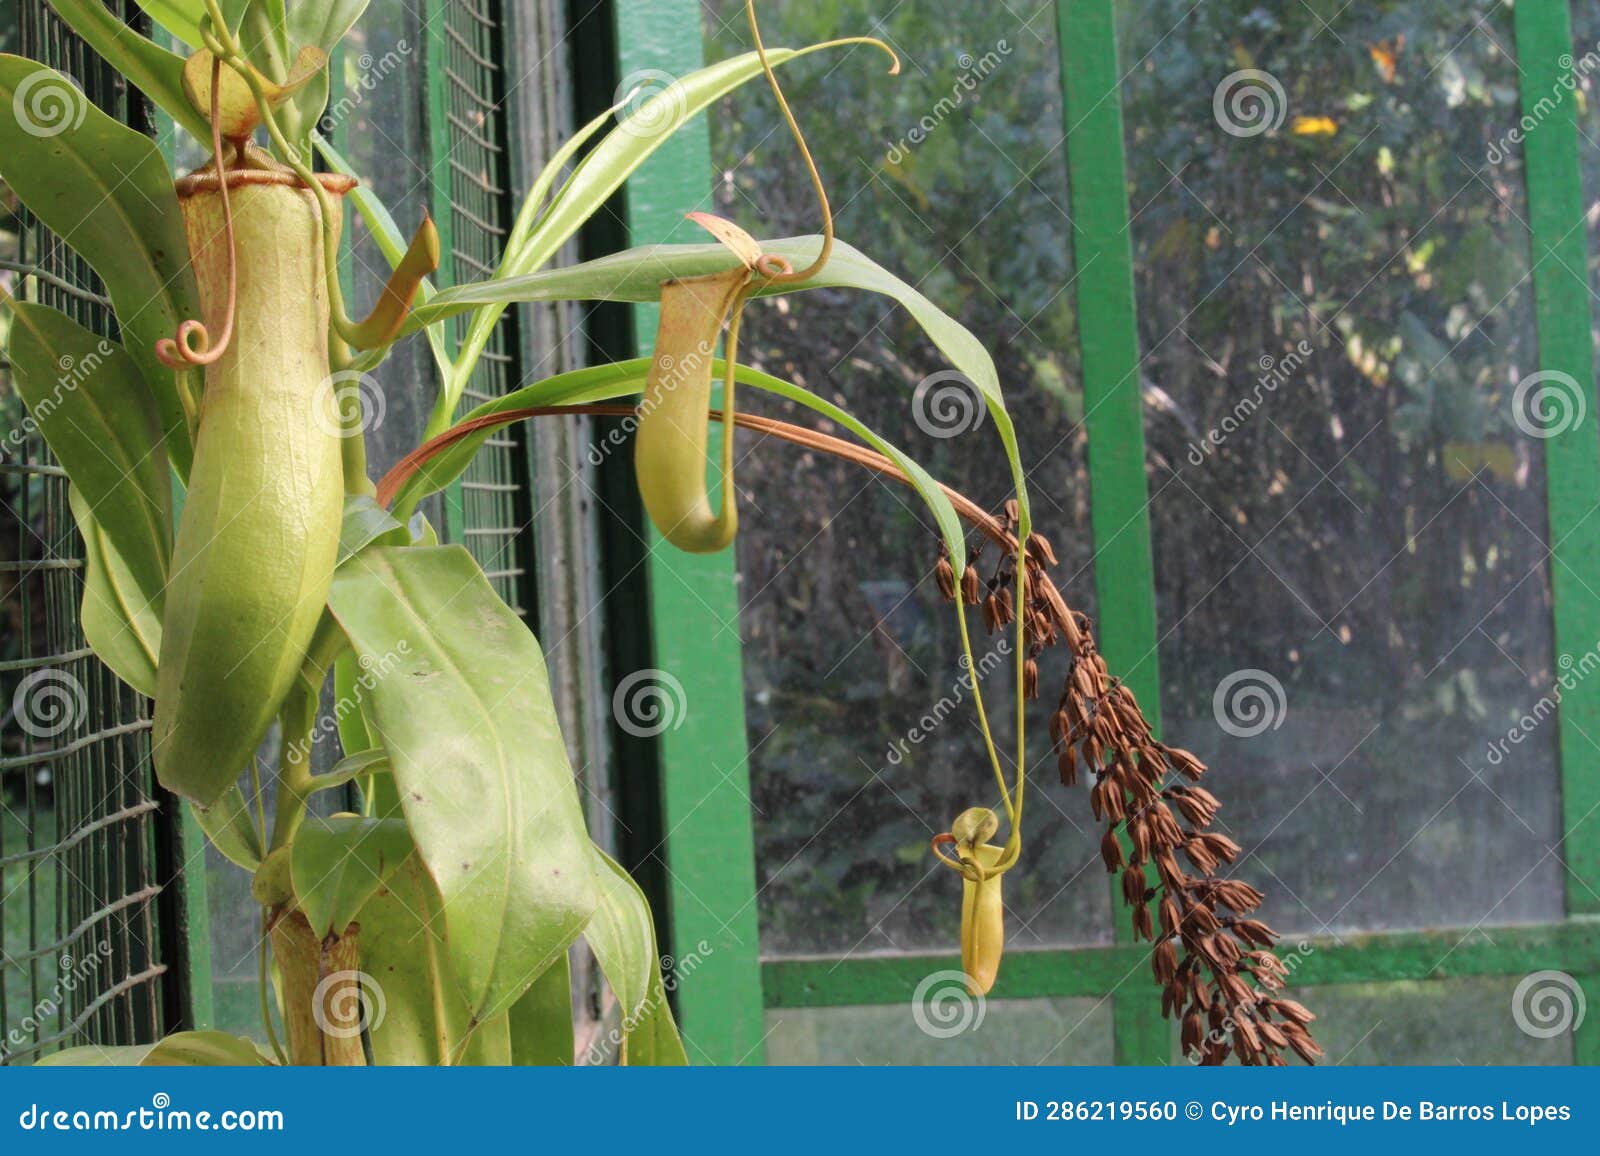 nephentes tropical pitcher plant details photo,nepenthes mirabilis, asian species, introduced species